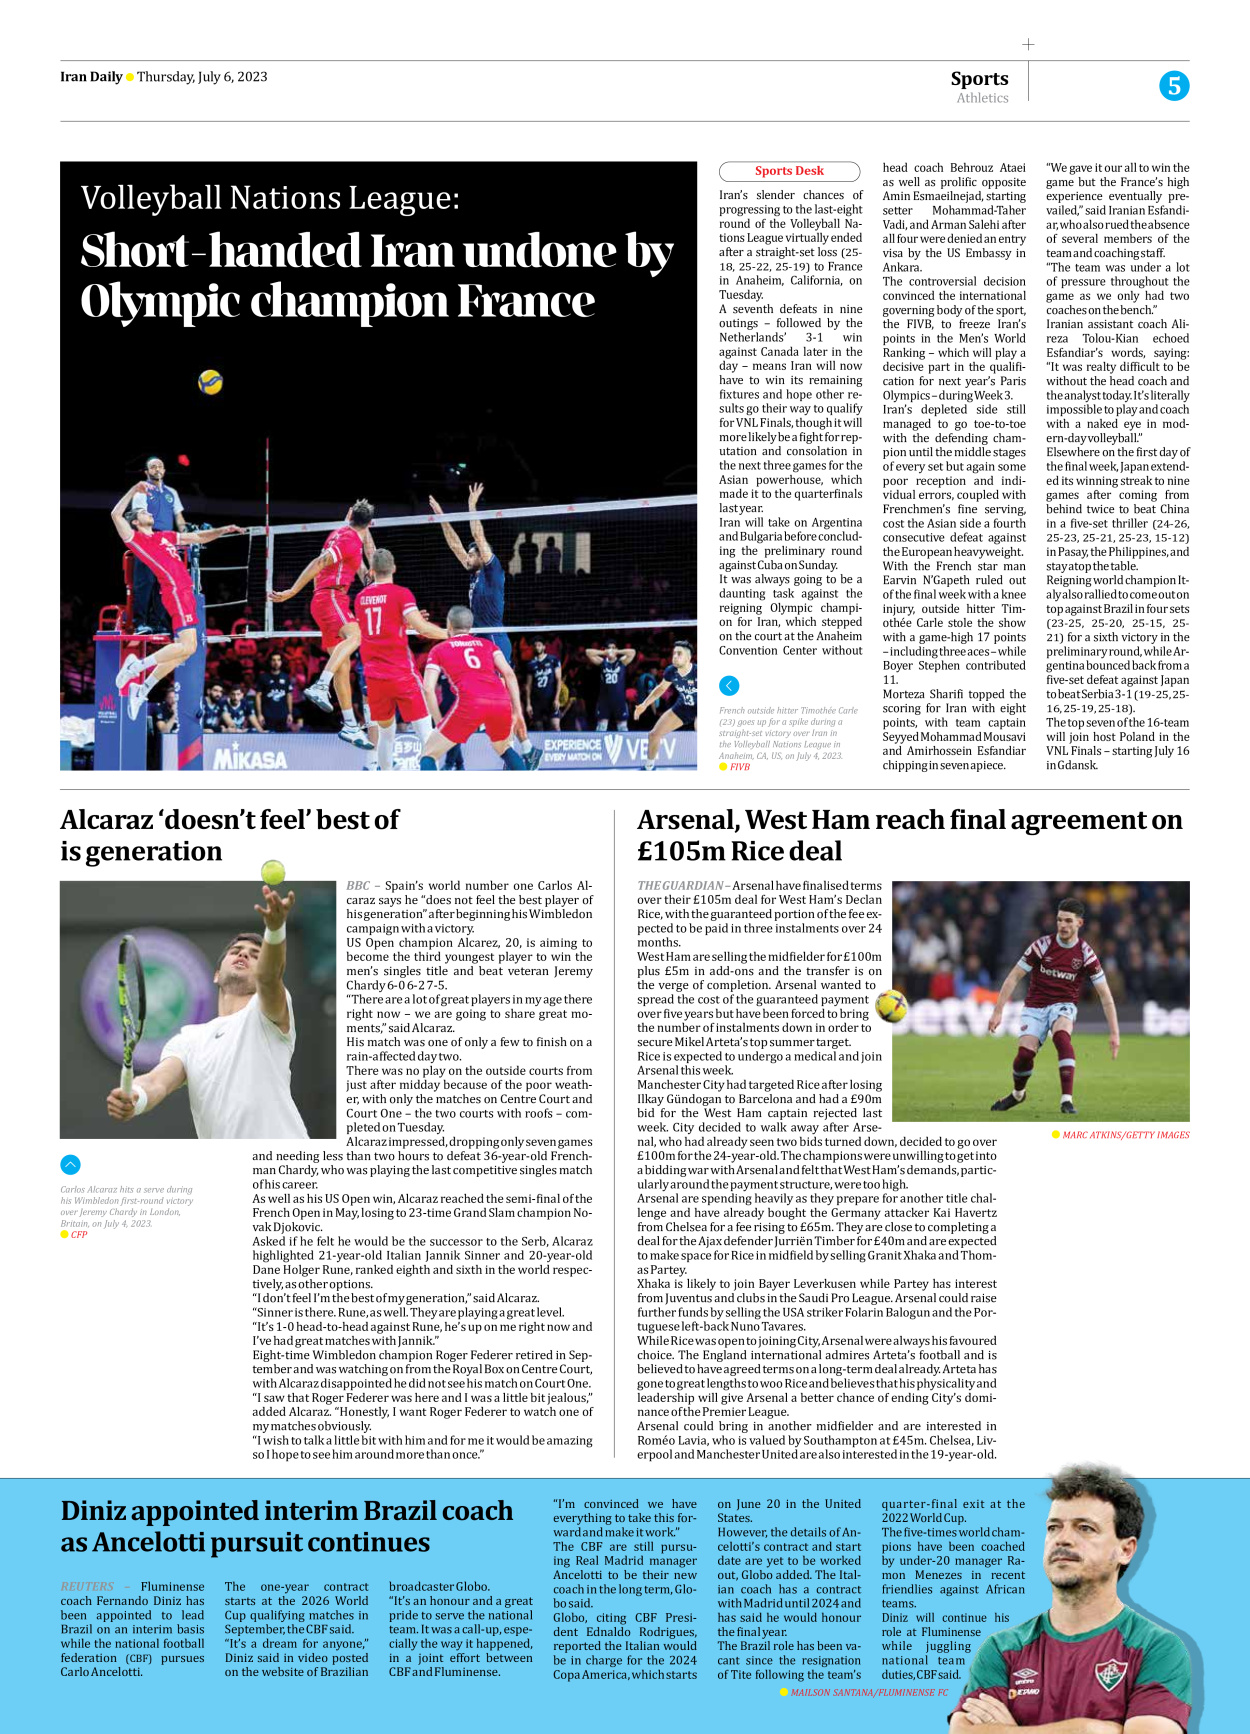 Iran Daily - Number Seven Thousand Three Hundred and Thirty Two - 06 July 2023 - Page 5